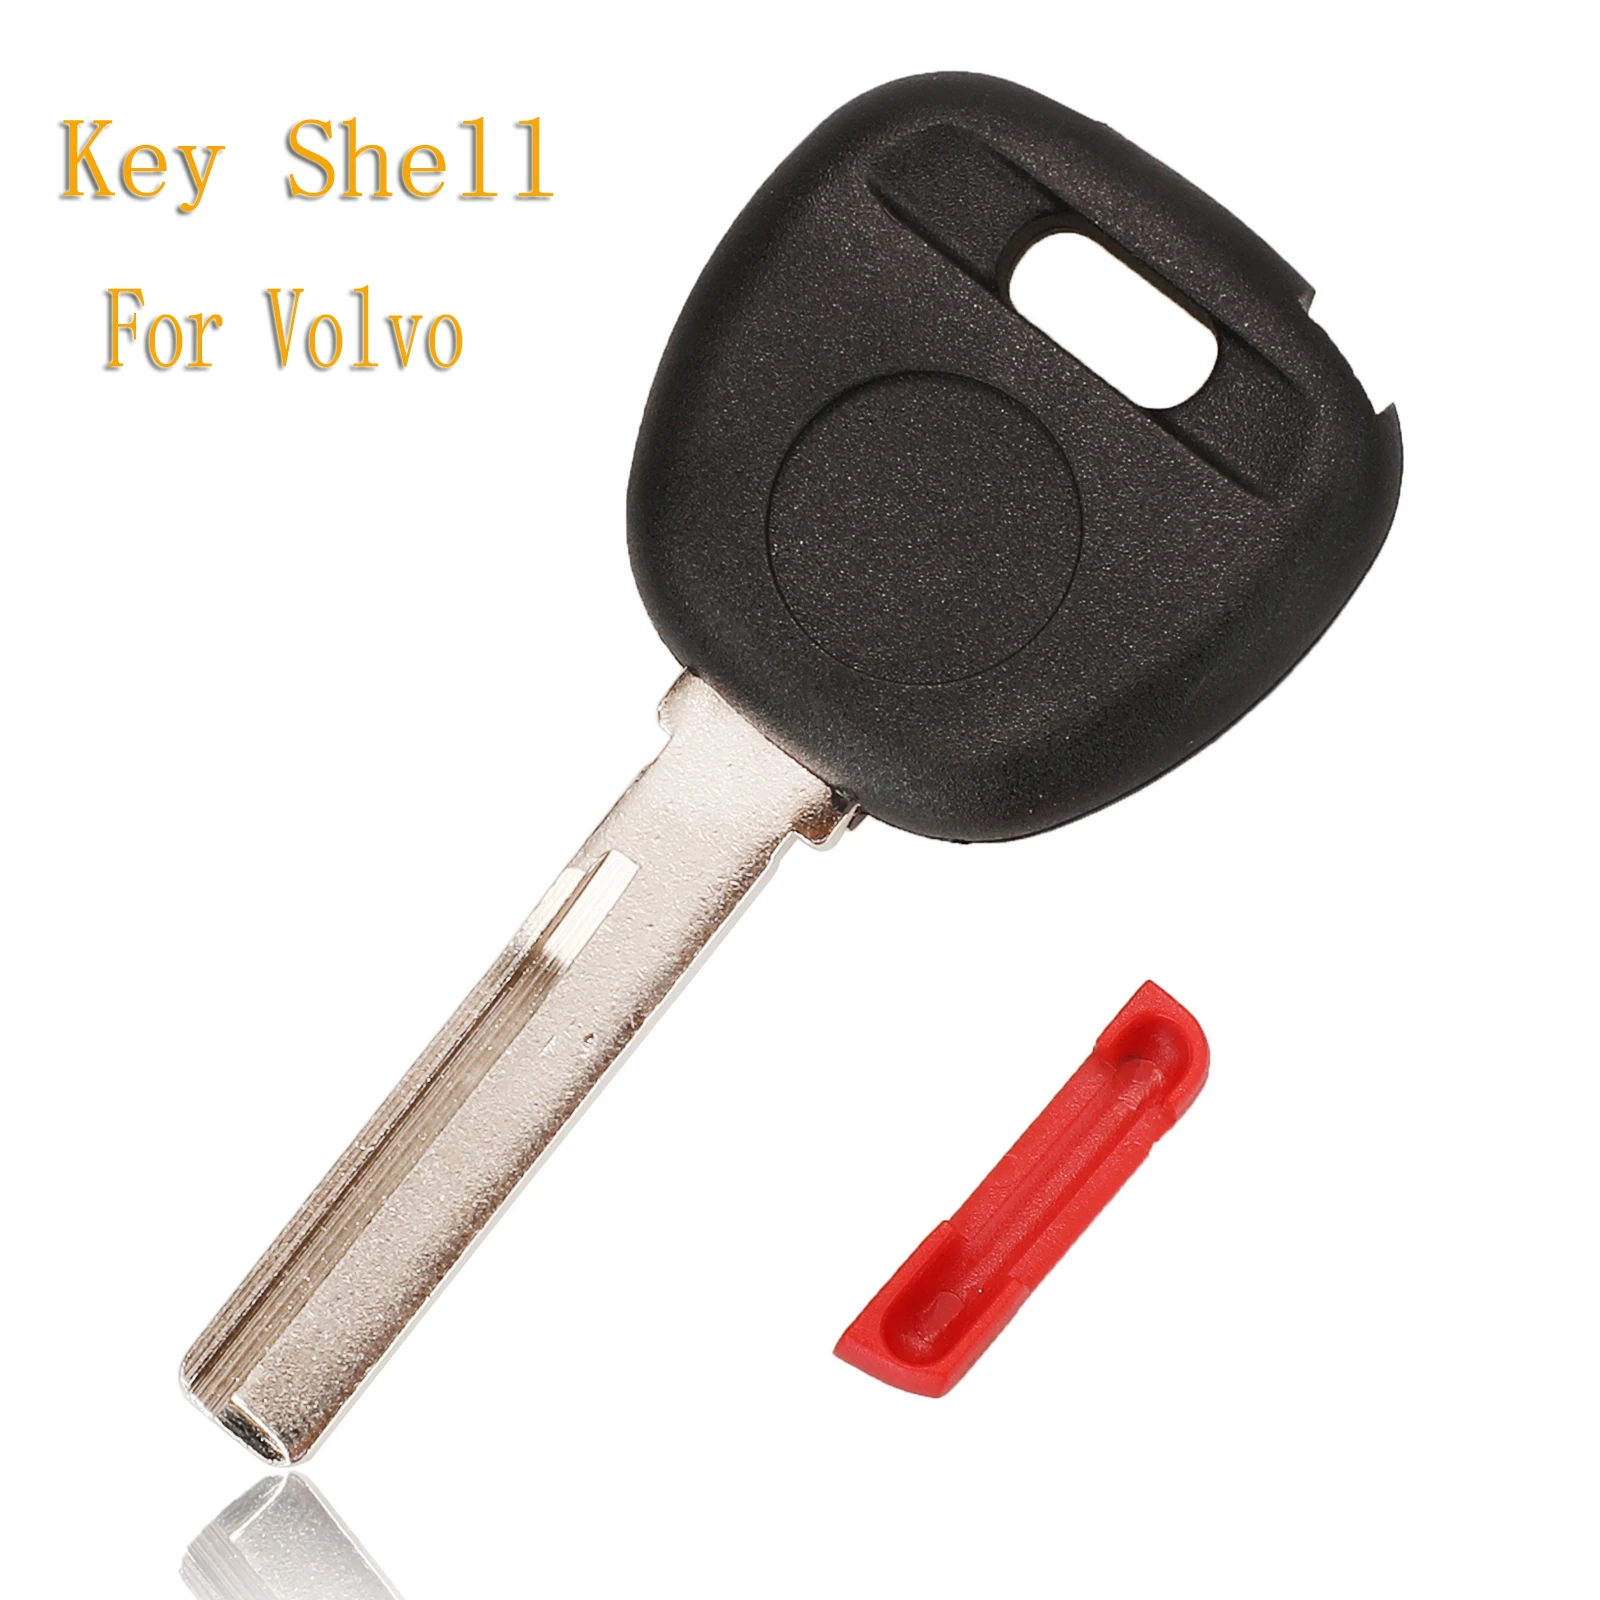 

jingyuqin 10pcs/lot Replacement Key Shell Cover For Volvo S40 V40 S60 S80 XC70 No Transponder Chips Original Case With Red Plug